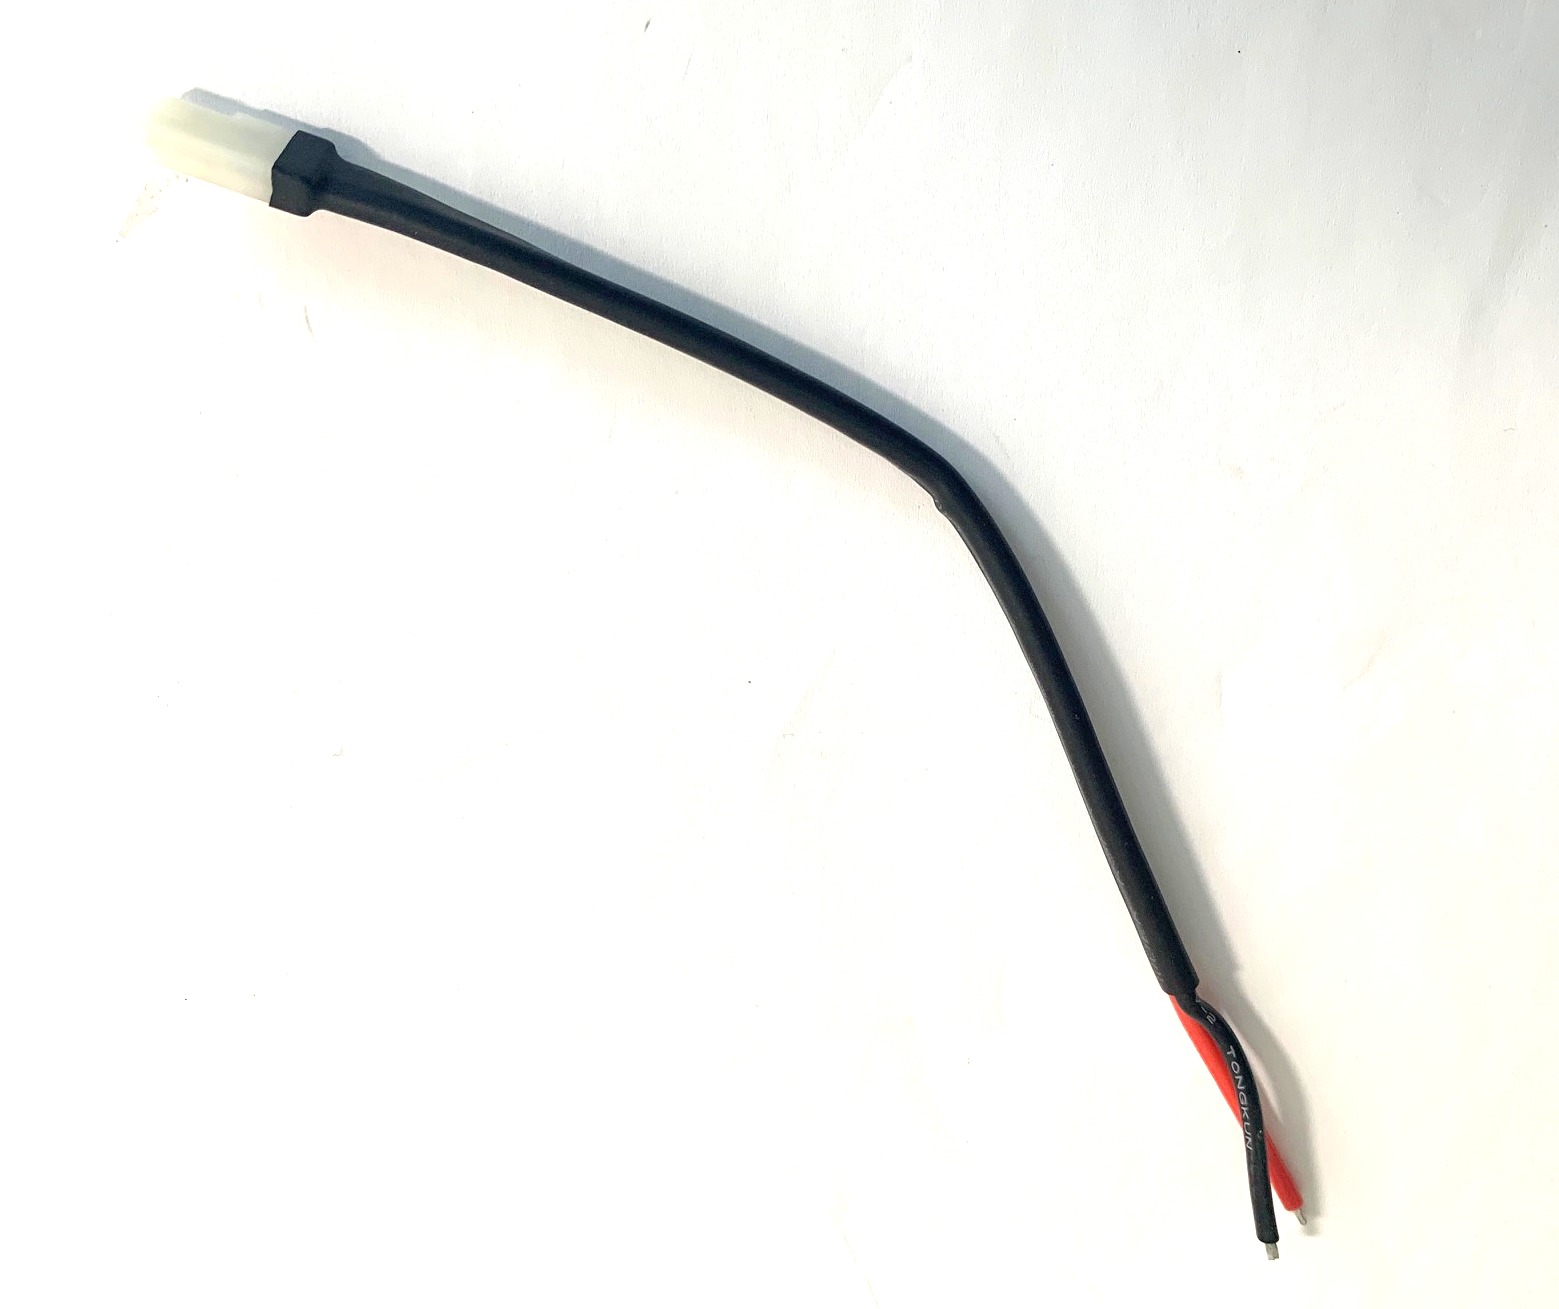 Molex 1625-2R1 connector Female with 200 mm Kabel (40 mm frei)